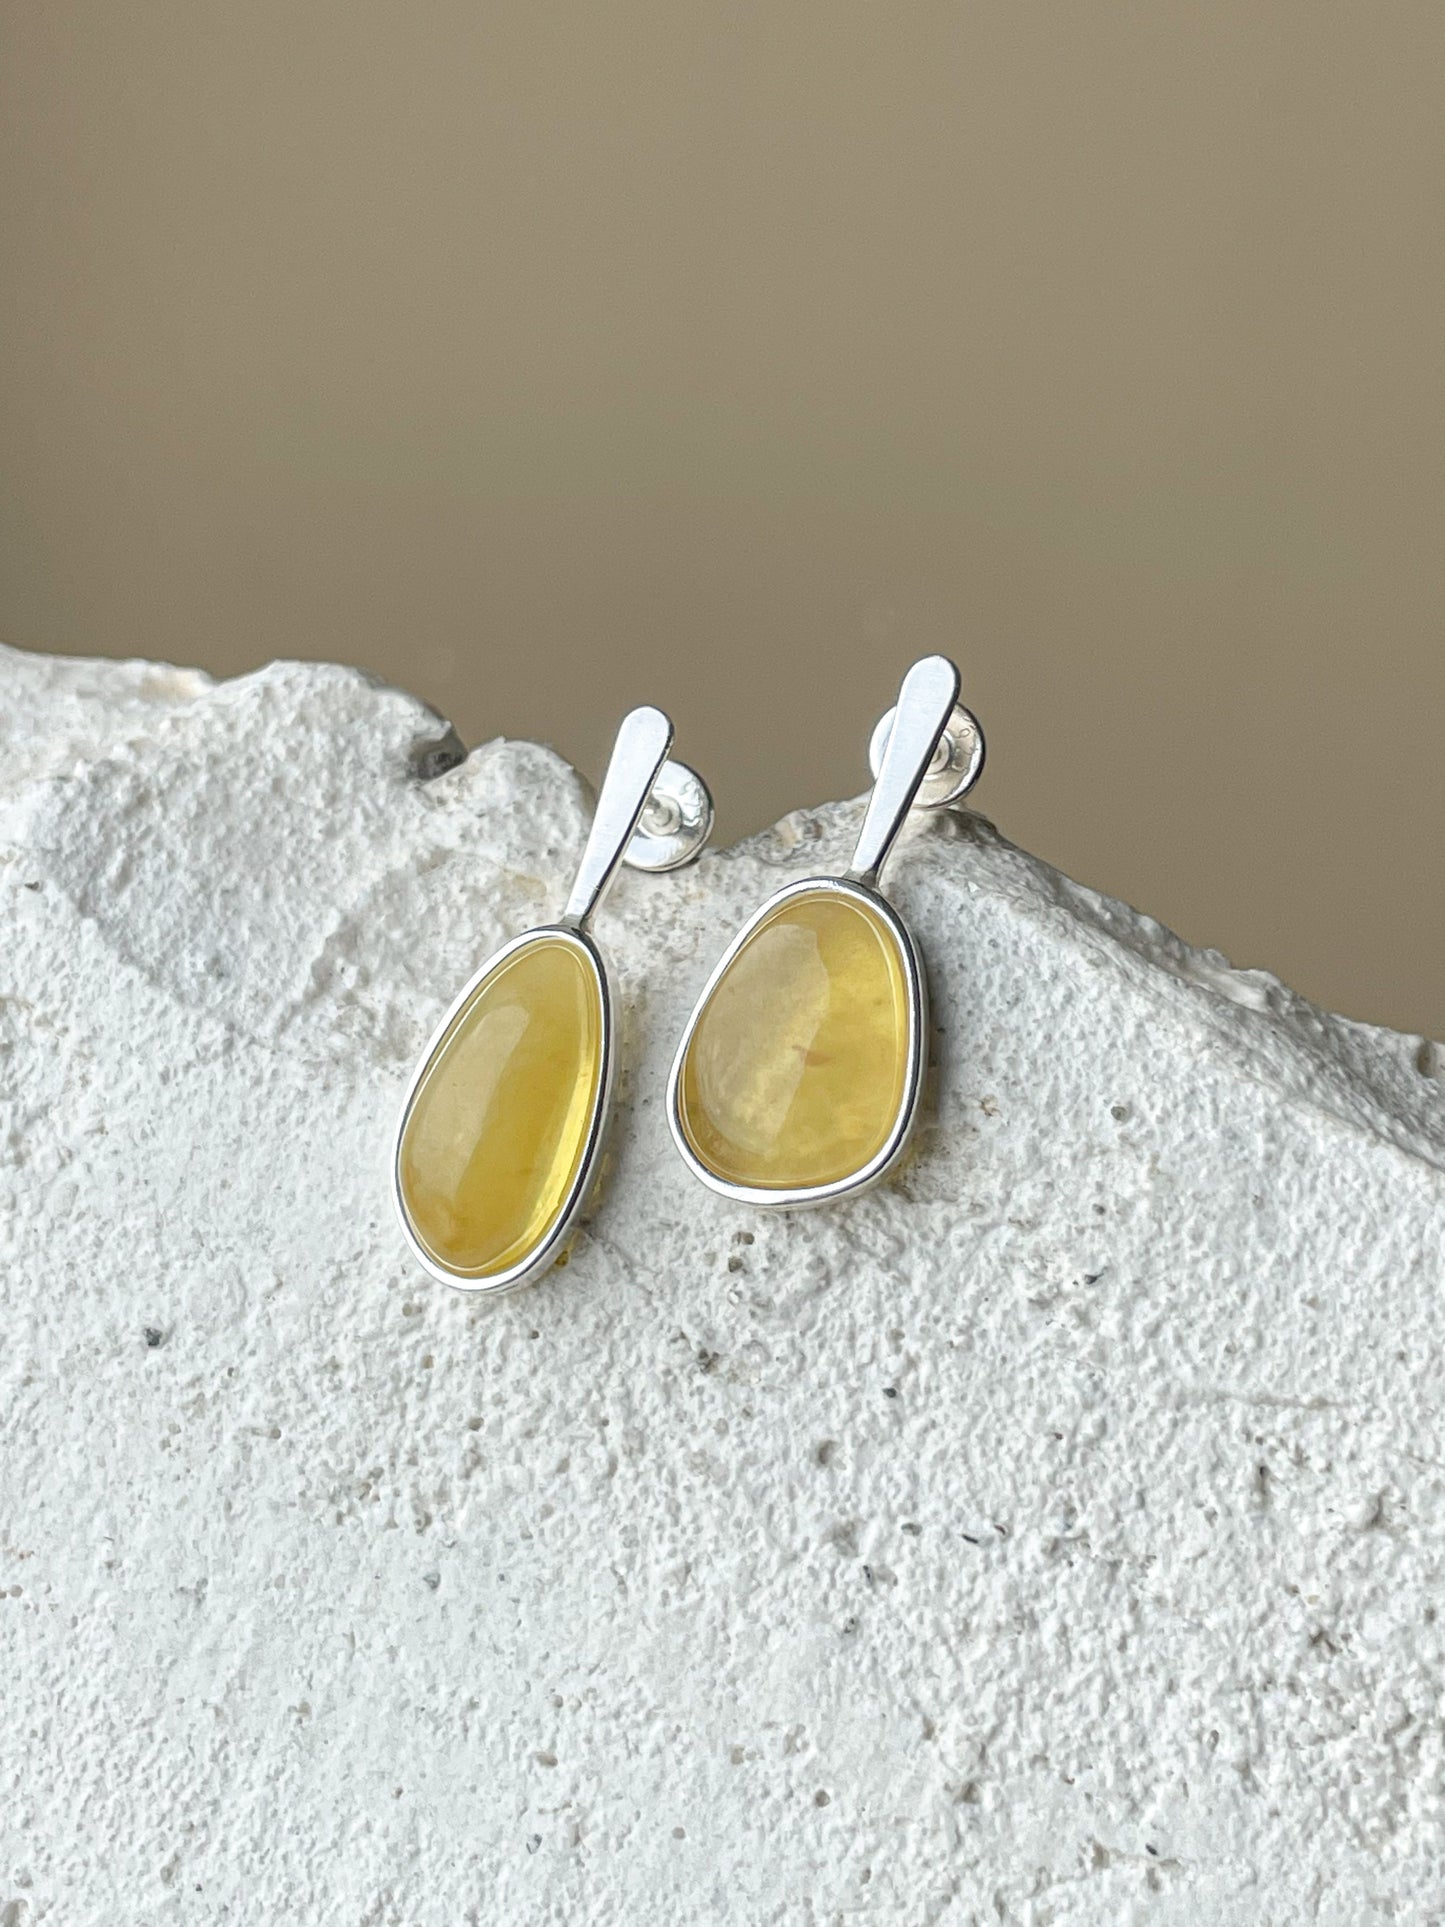 Honey amber stud earrings - Sterling silver - Mismatched earrings collection